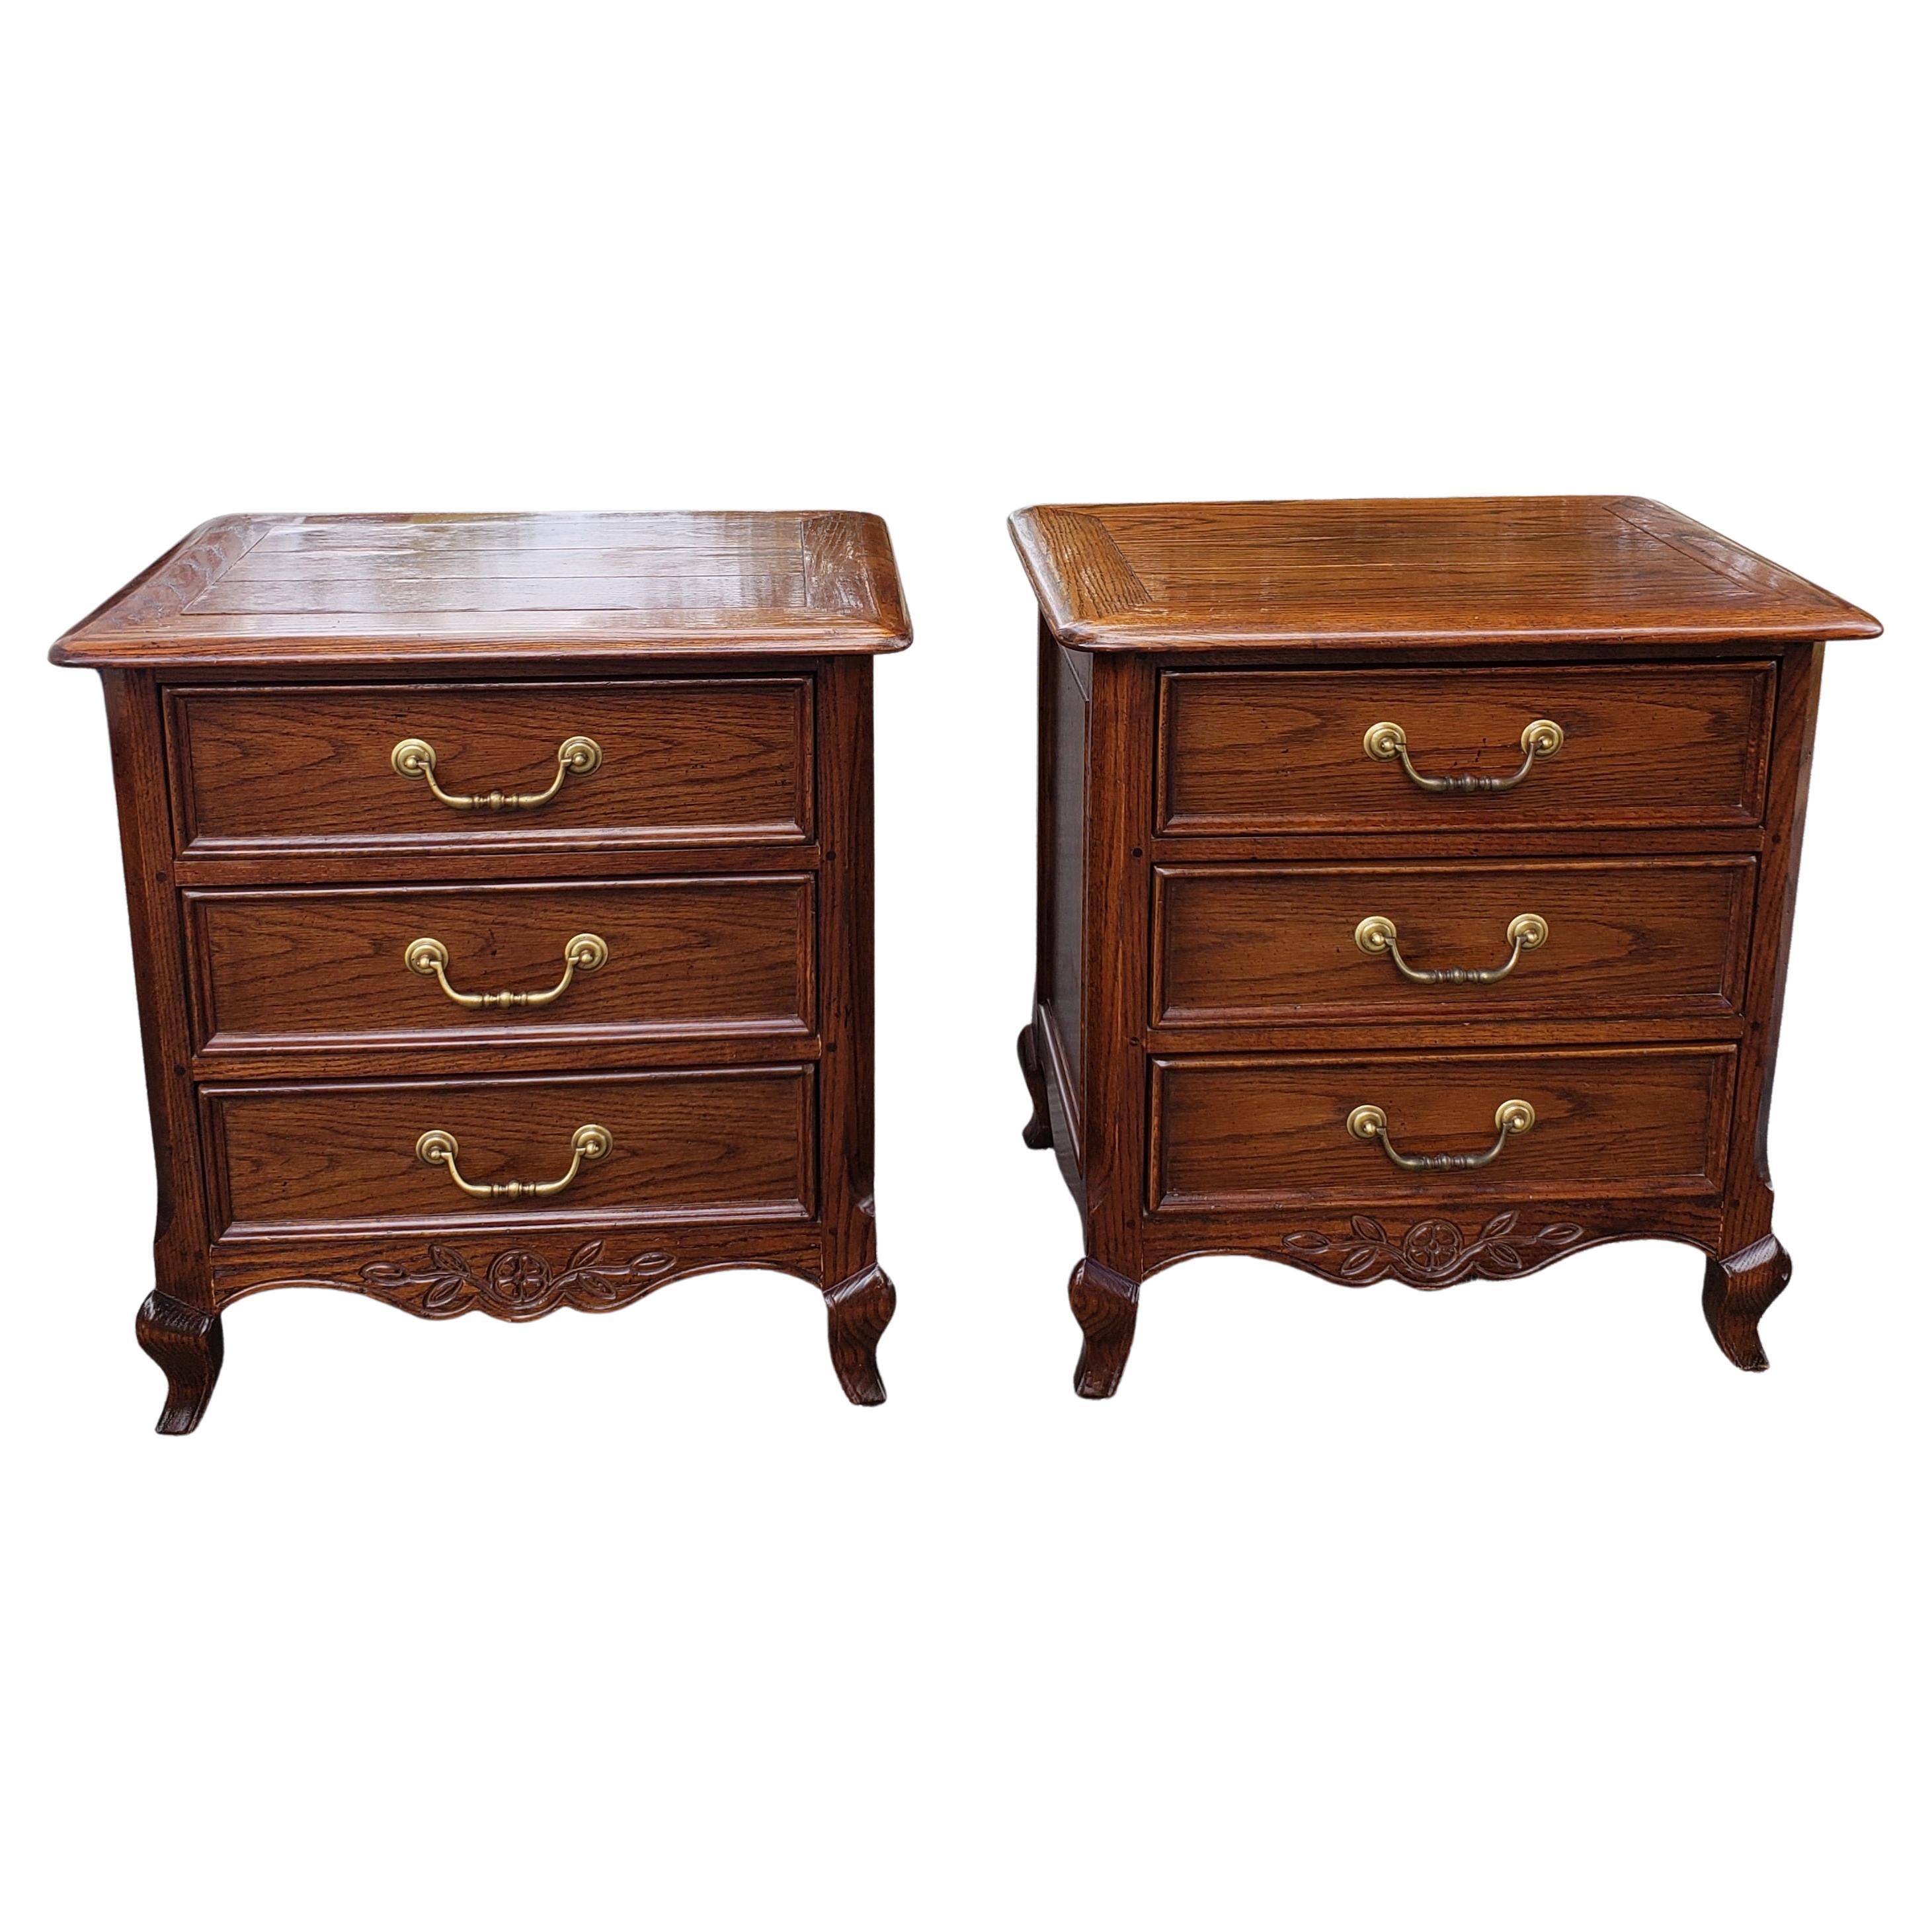 Century Furniture French Country Oak Bedside Chests of Drawers Nighstands, Pair